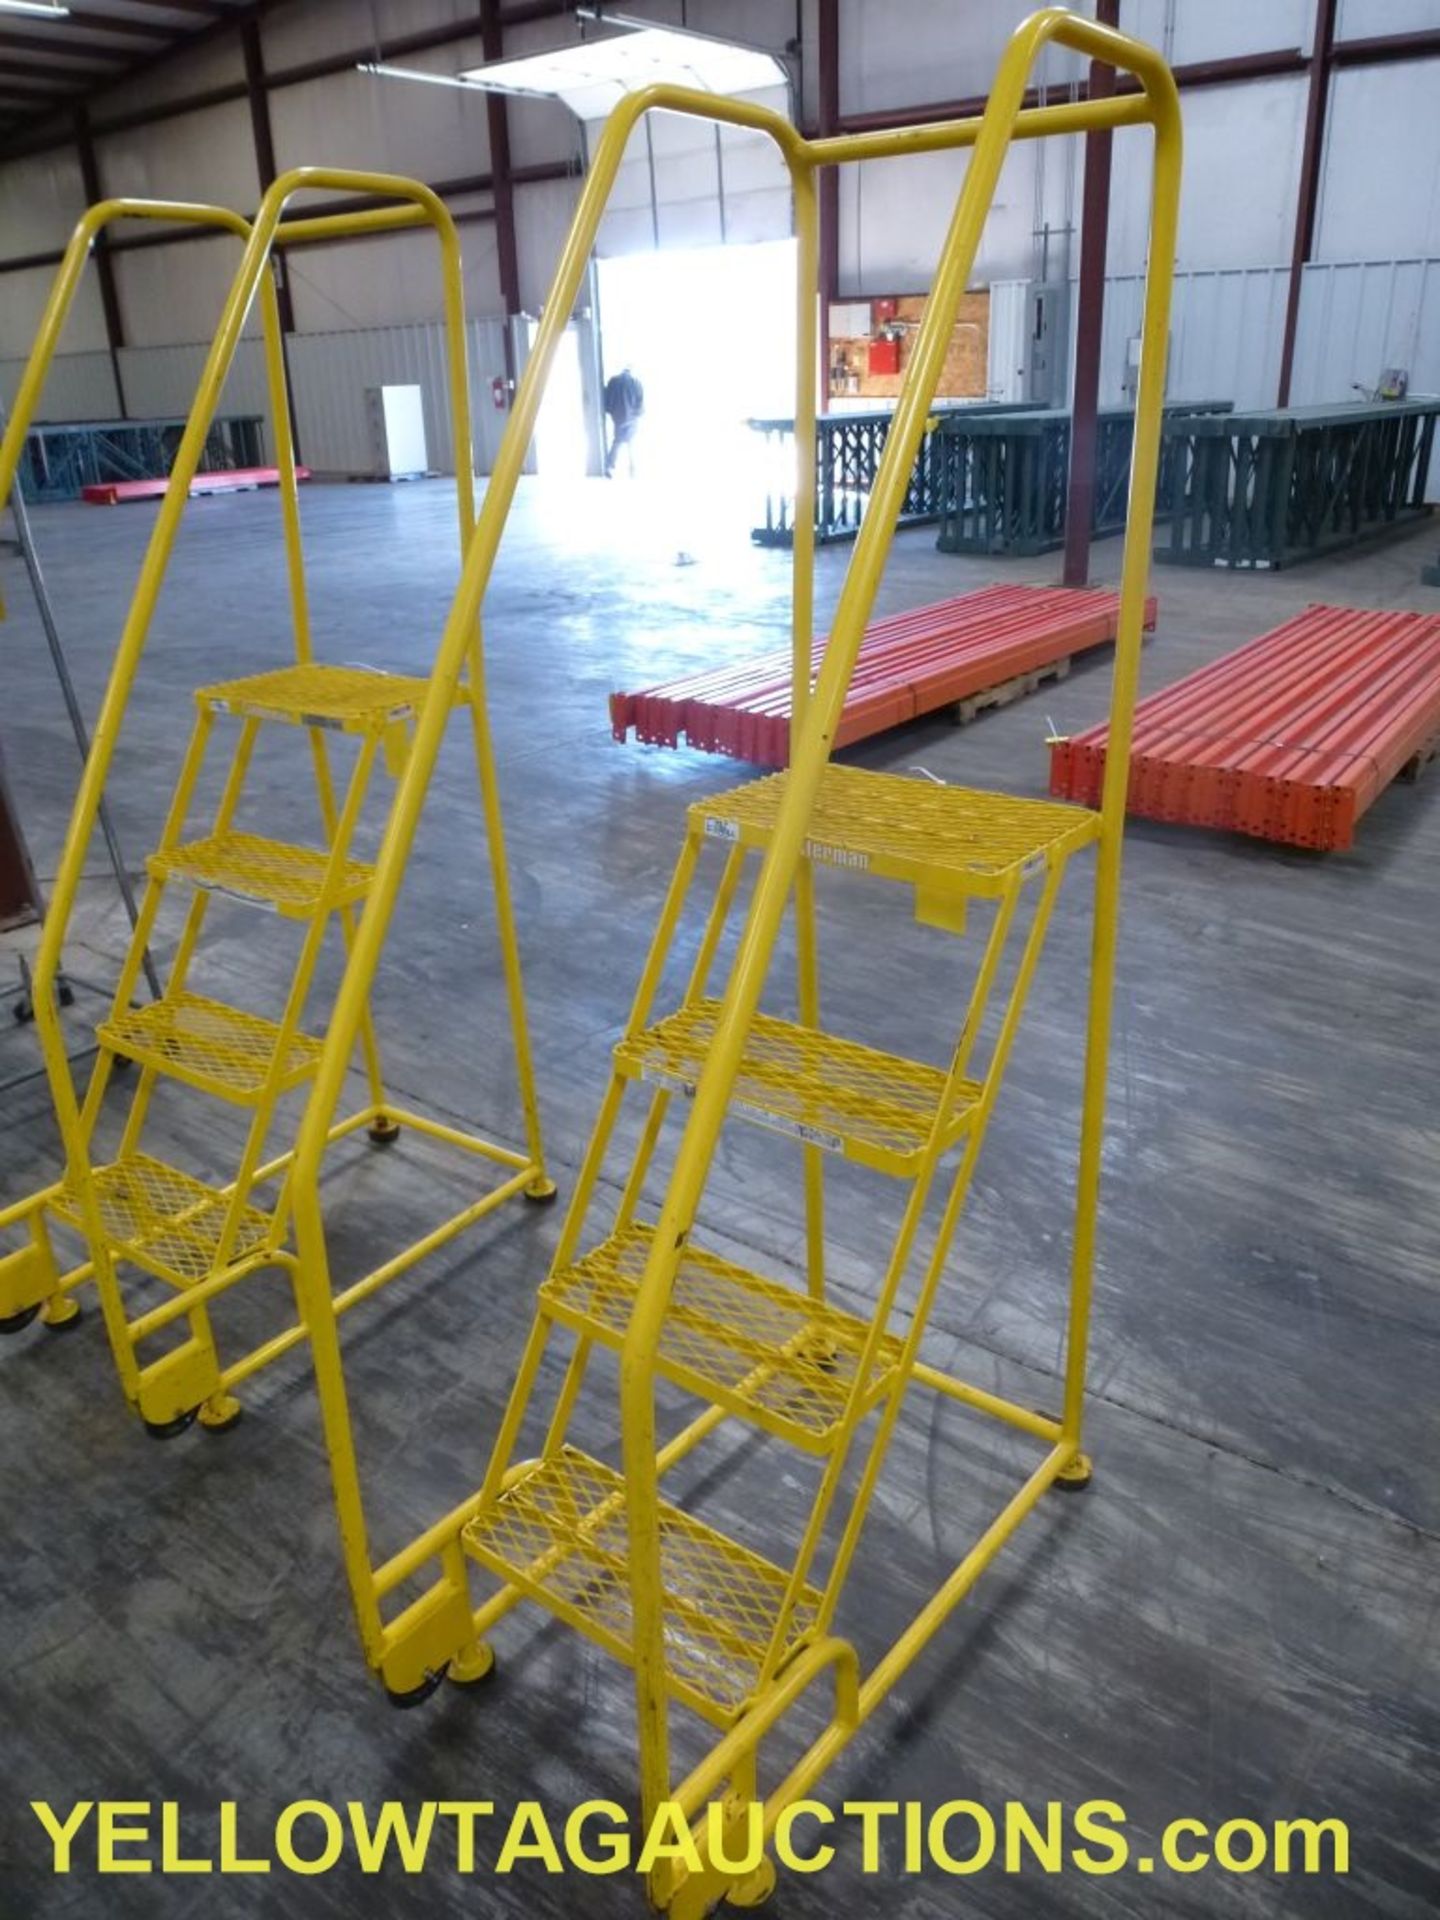 Cotterman Rolling 4-Step Ladder|16" x 48"; 450 lbs Max|Lot Loading Fee: $5.00 - Image 2 of 3